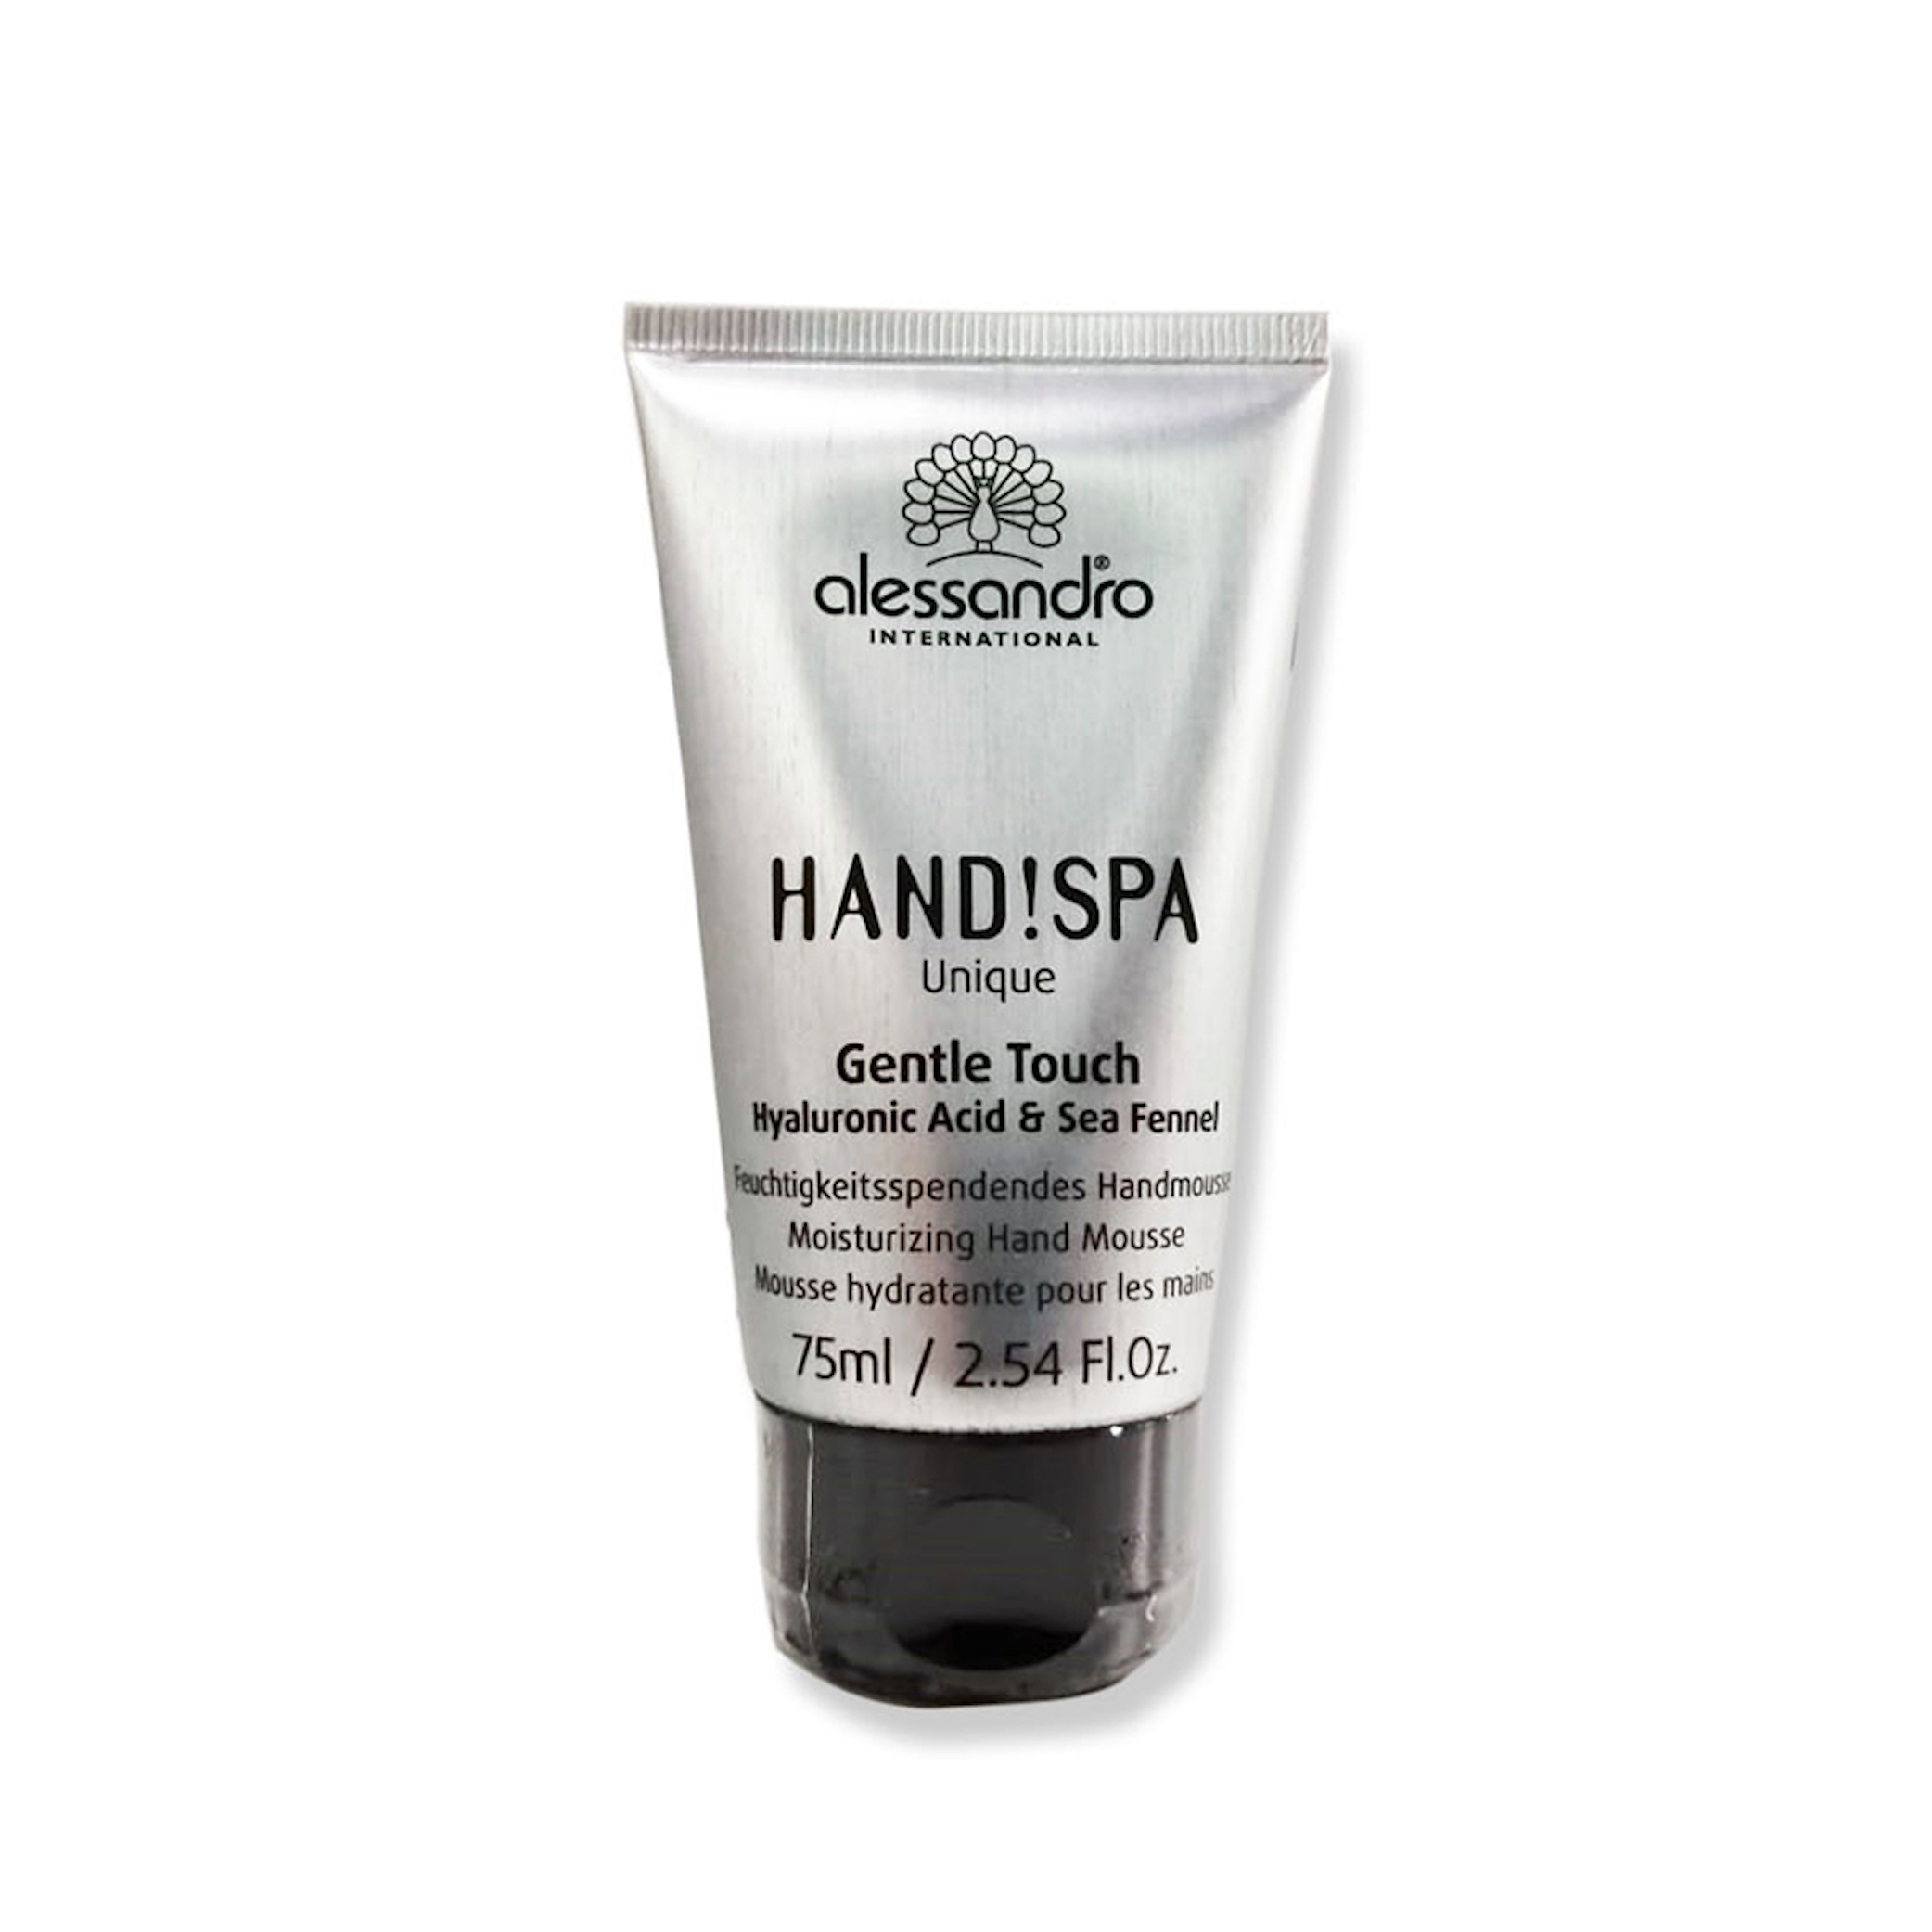 Spa 75 ml | Unique Gentle Tradeling | Touch Wholesale Prices Hand Alessandro